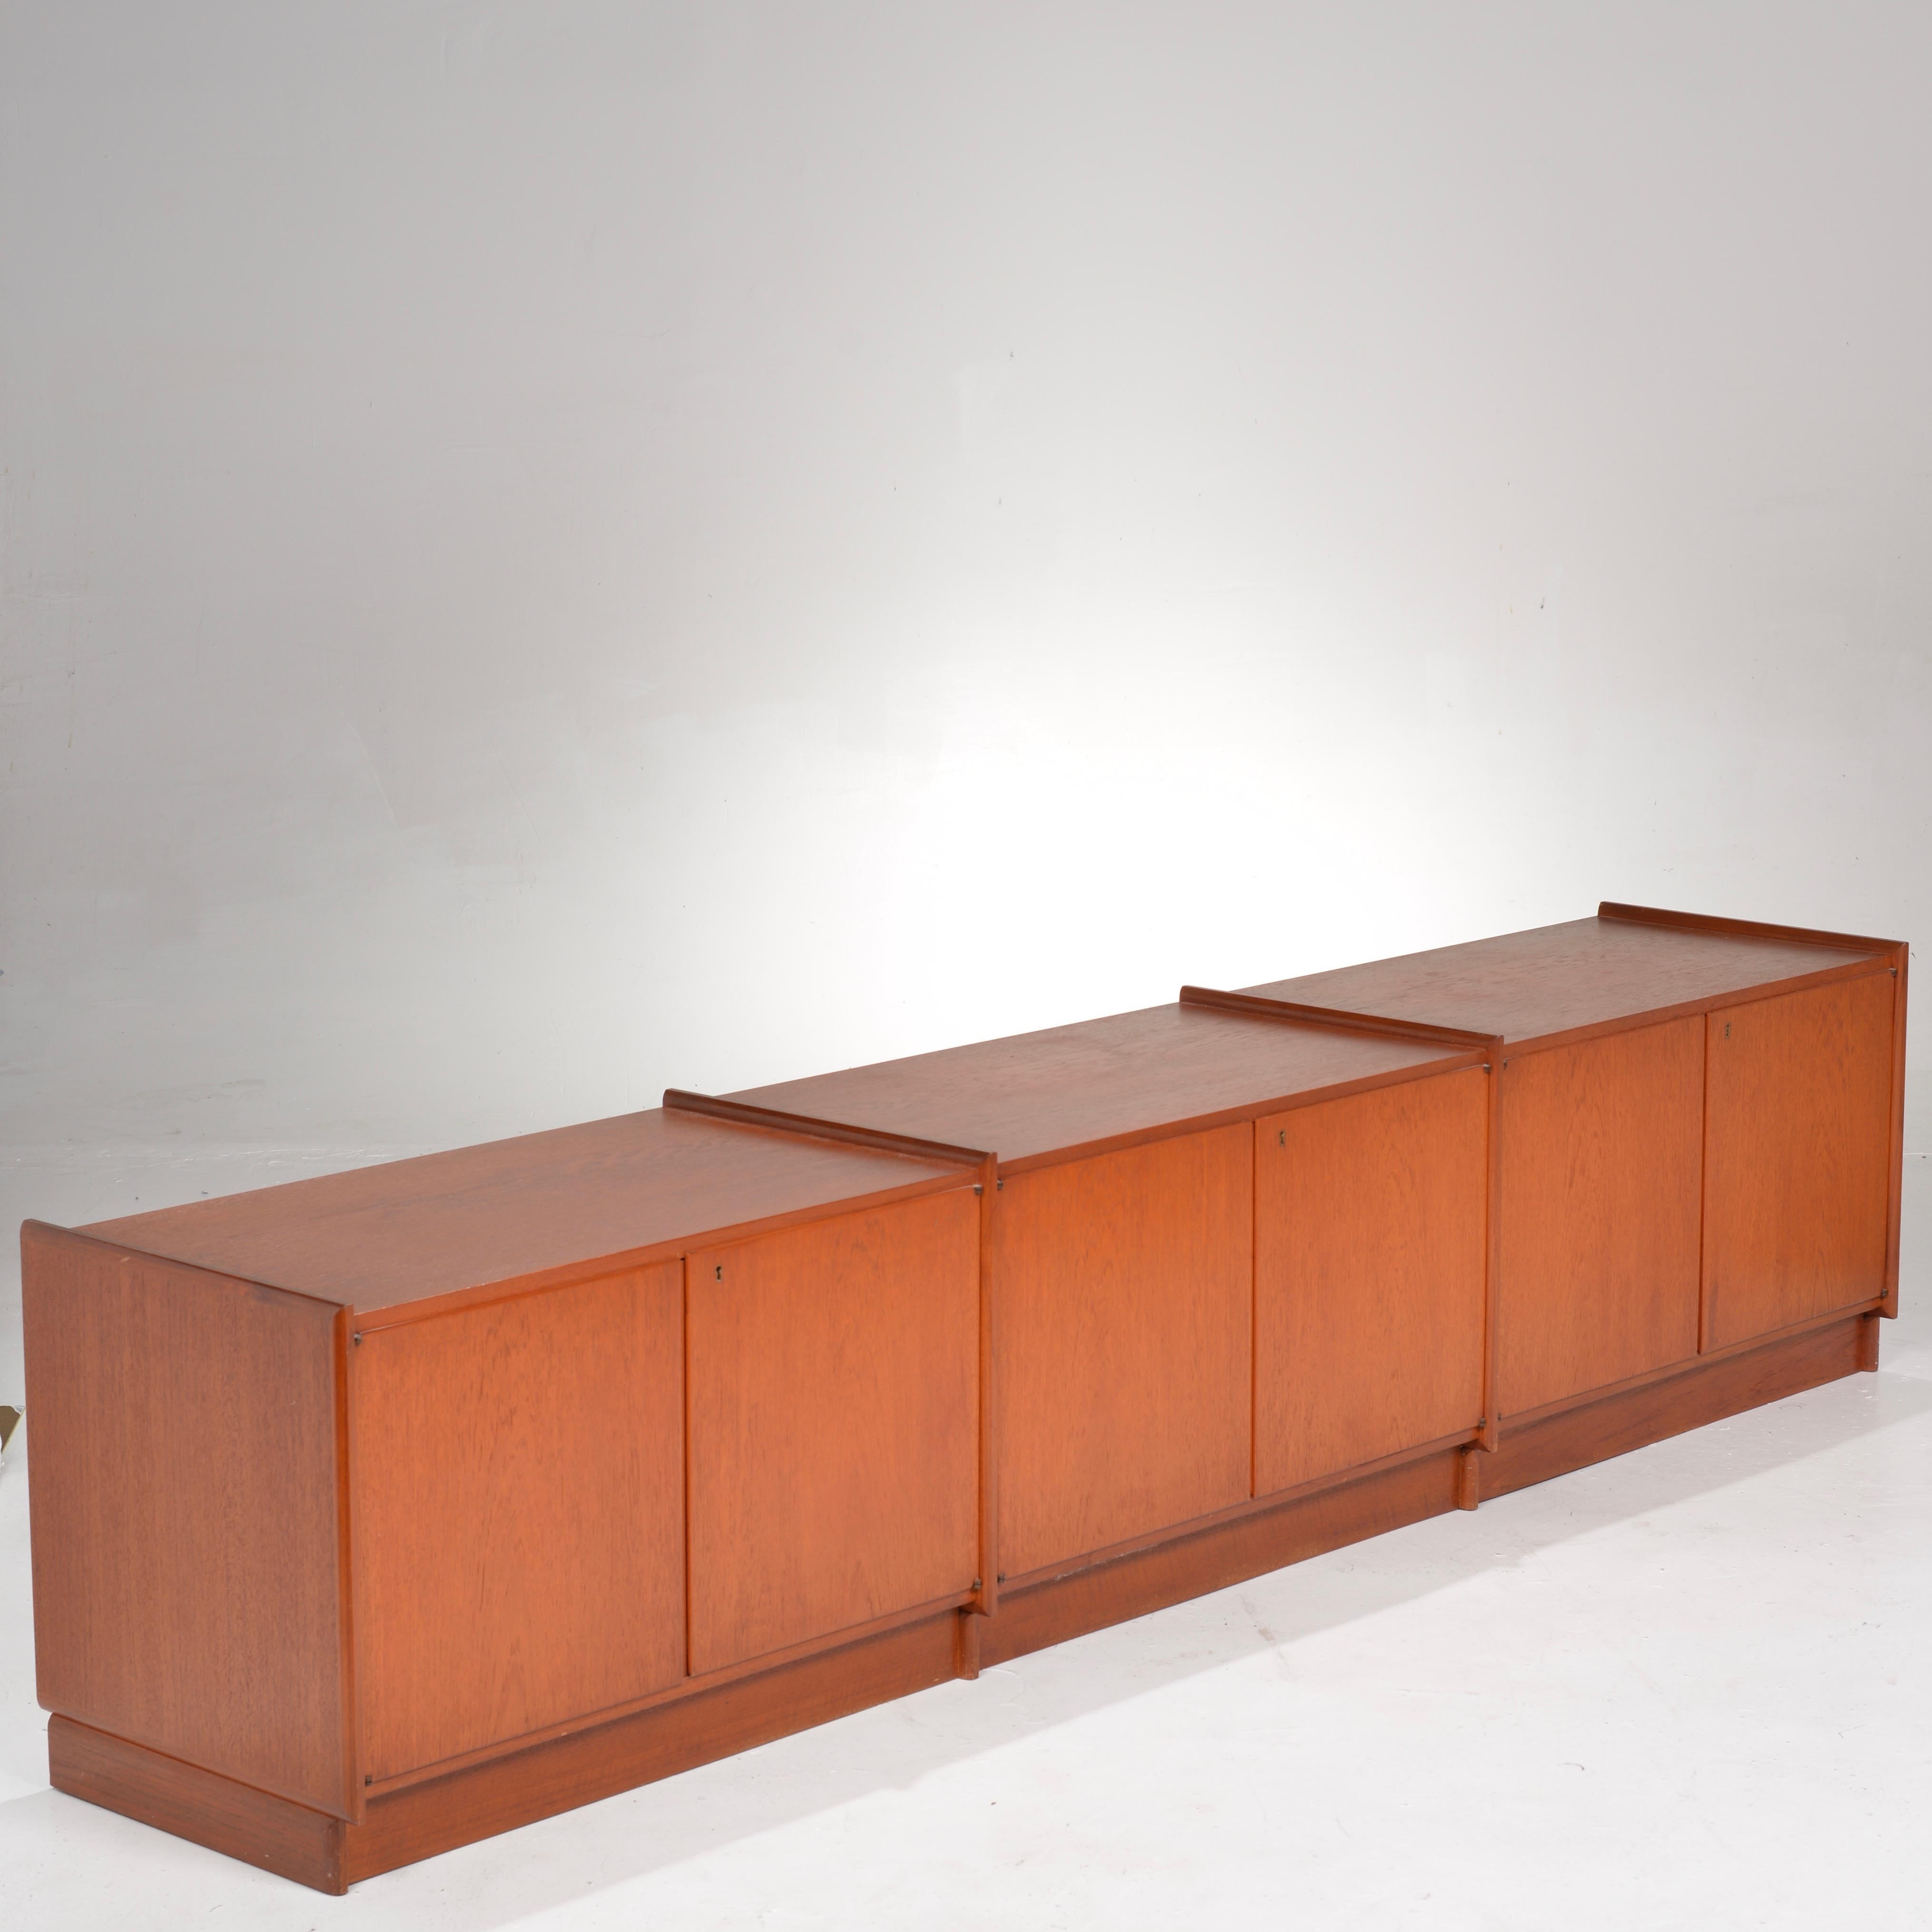 Low and long locking teak cabinet by Ib Juul Christensen for Arhtur Soltvedt Møbelfabrik. Made from beautifully selected teak veneer over solid wood. In excellent original condition.